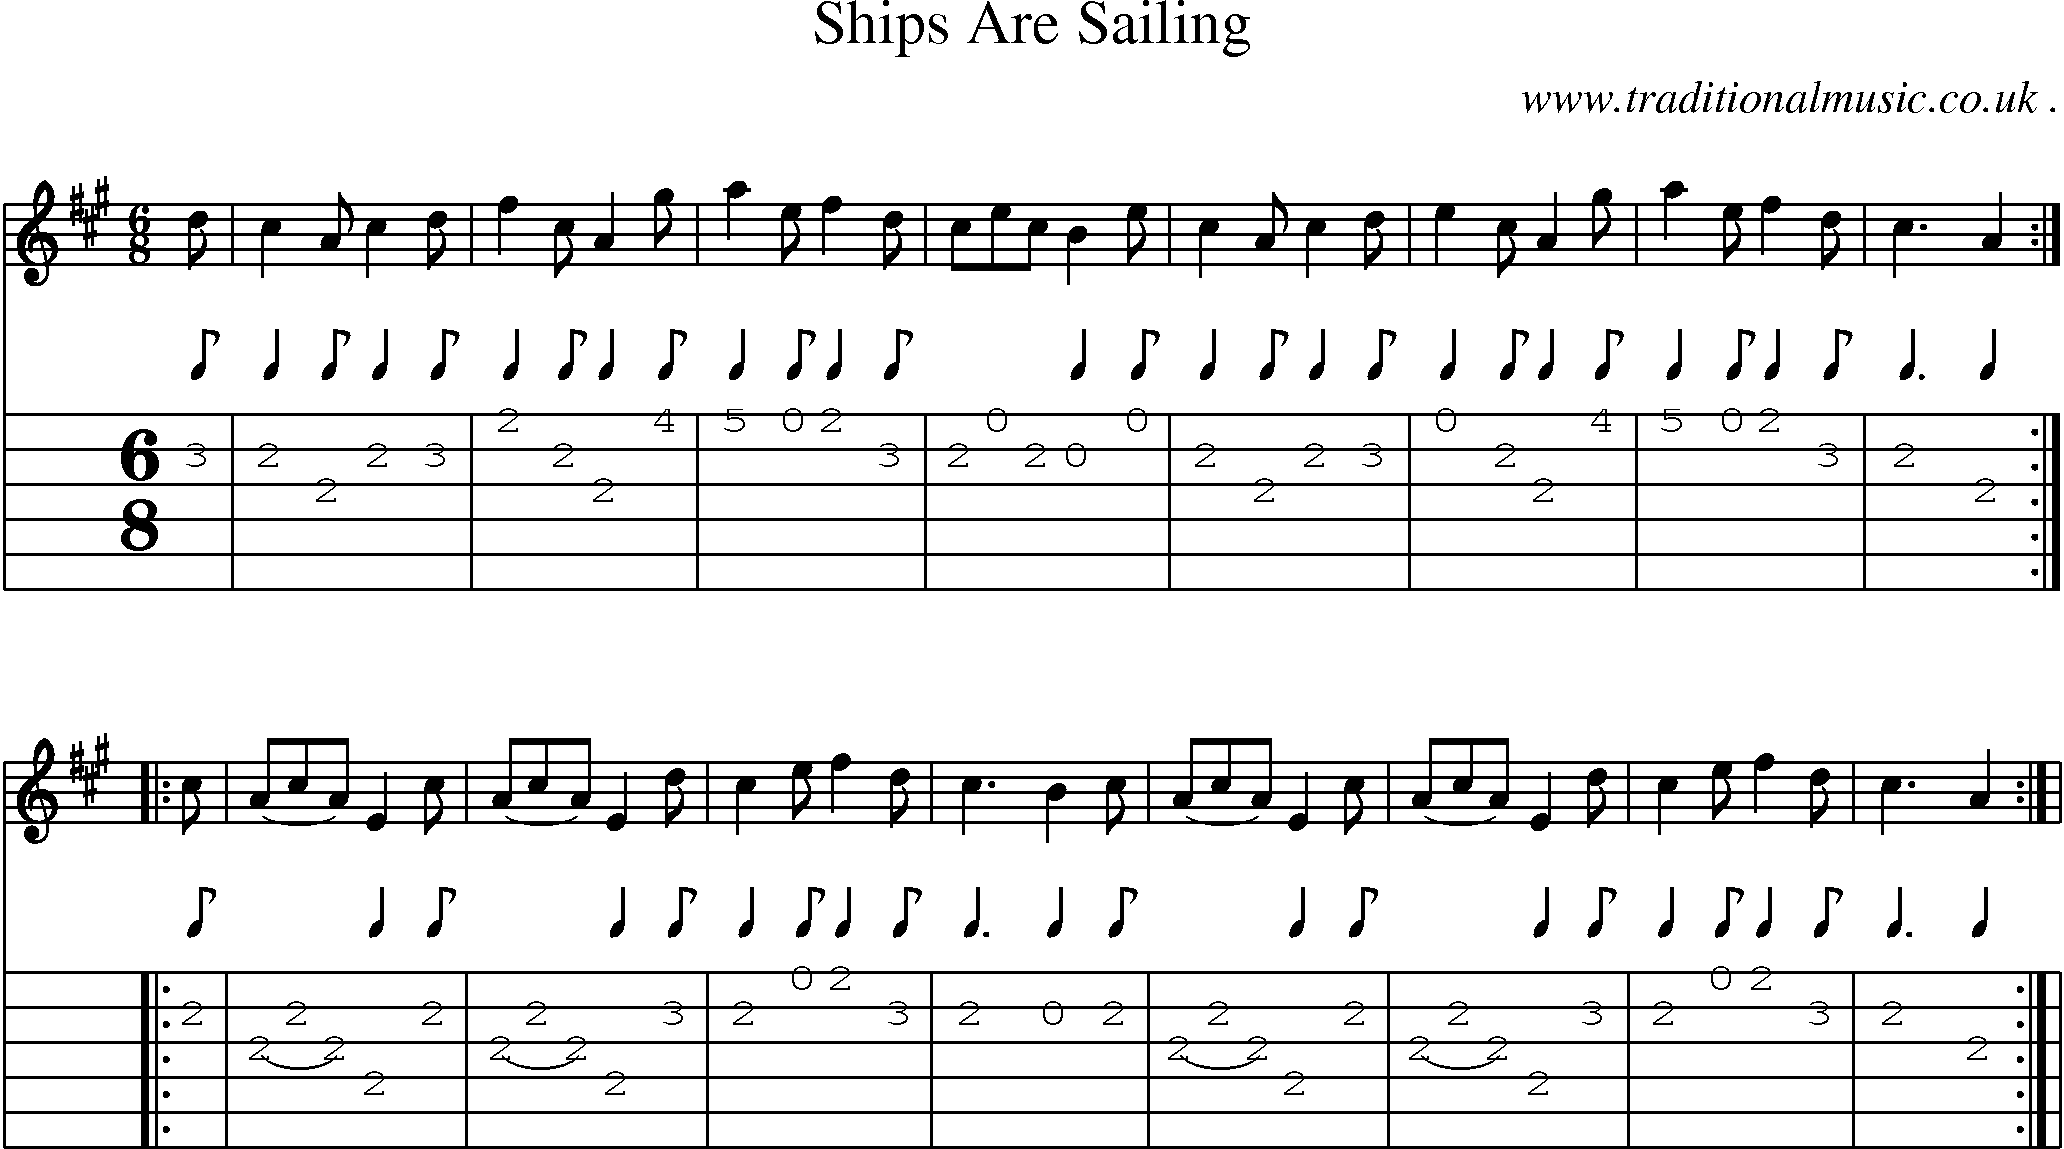 Sheet-Music and Guitar Tabs for Ships Are Sailing